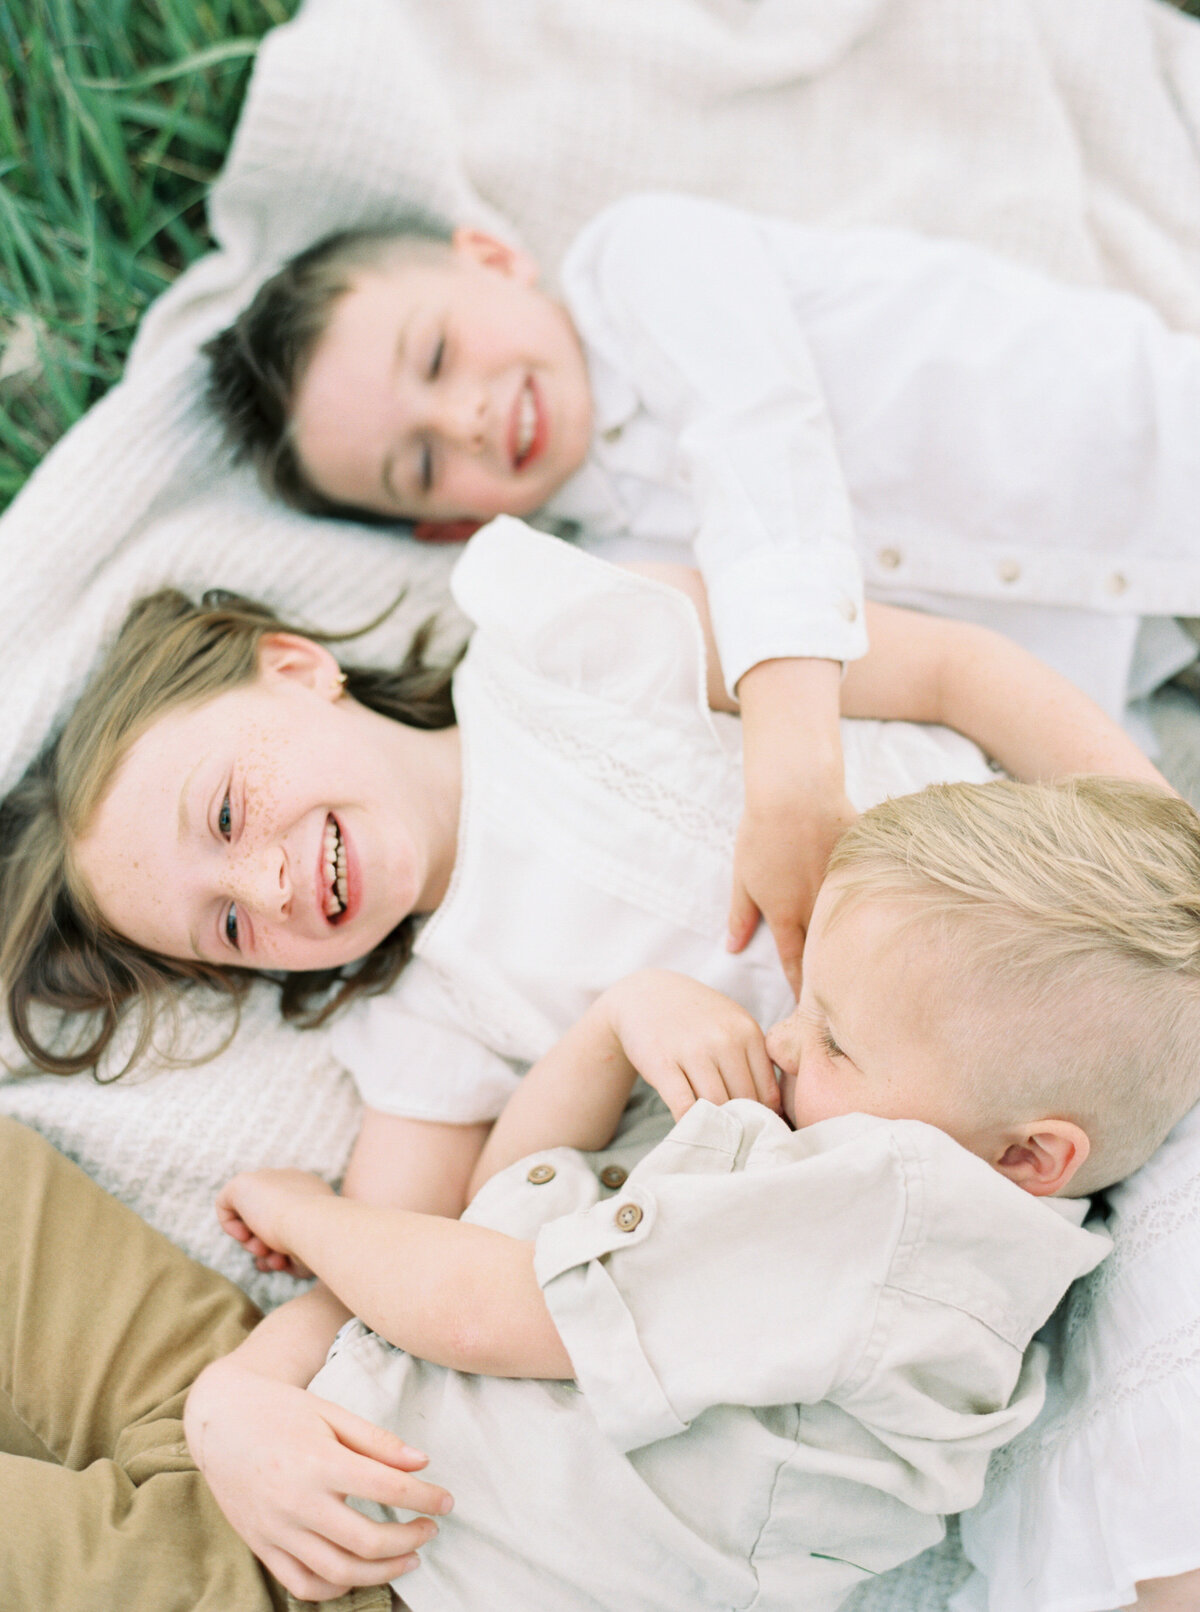 Three children on a blanket photographed by Chelsea Sliwa Photography